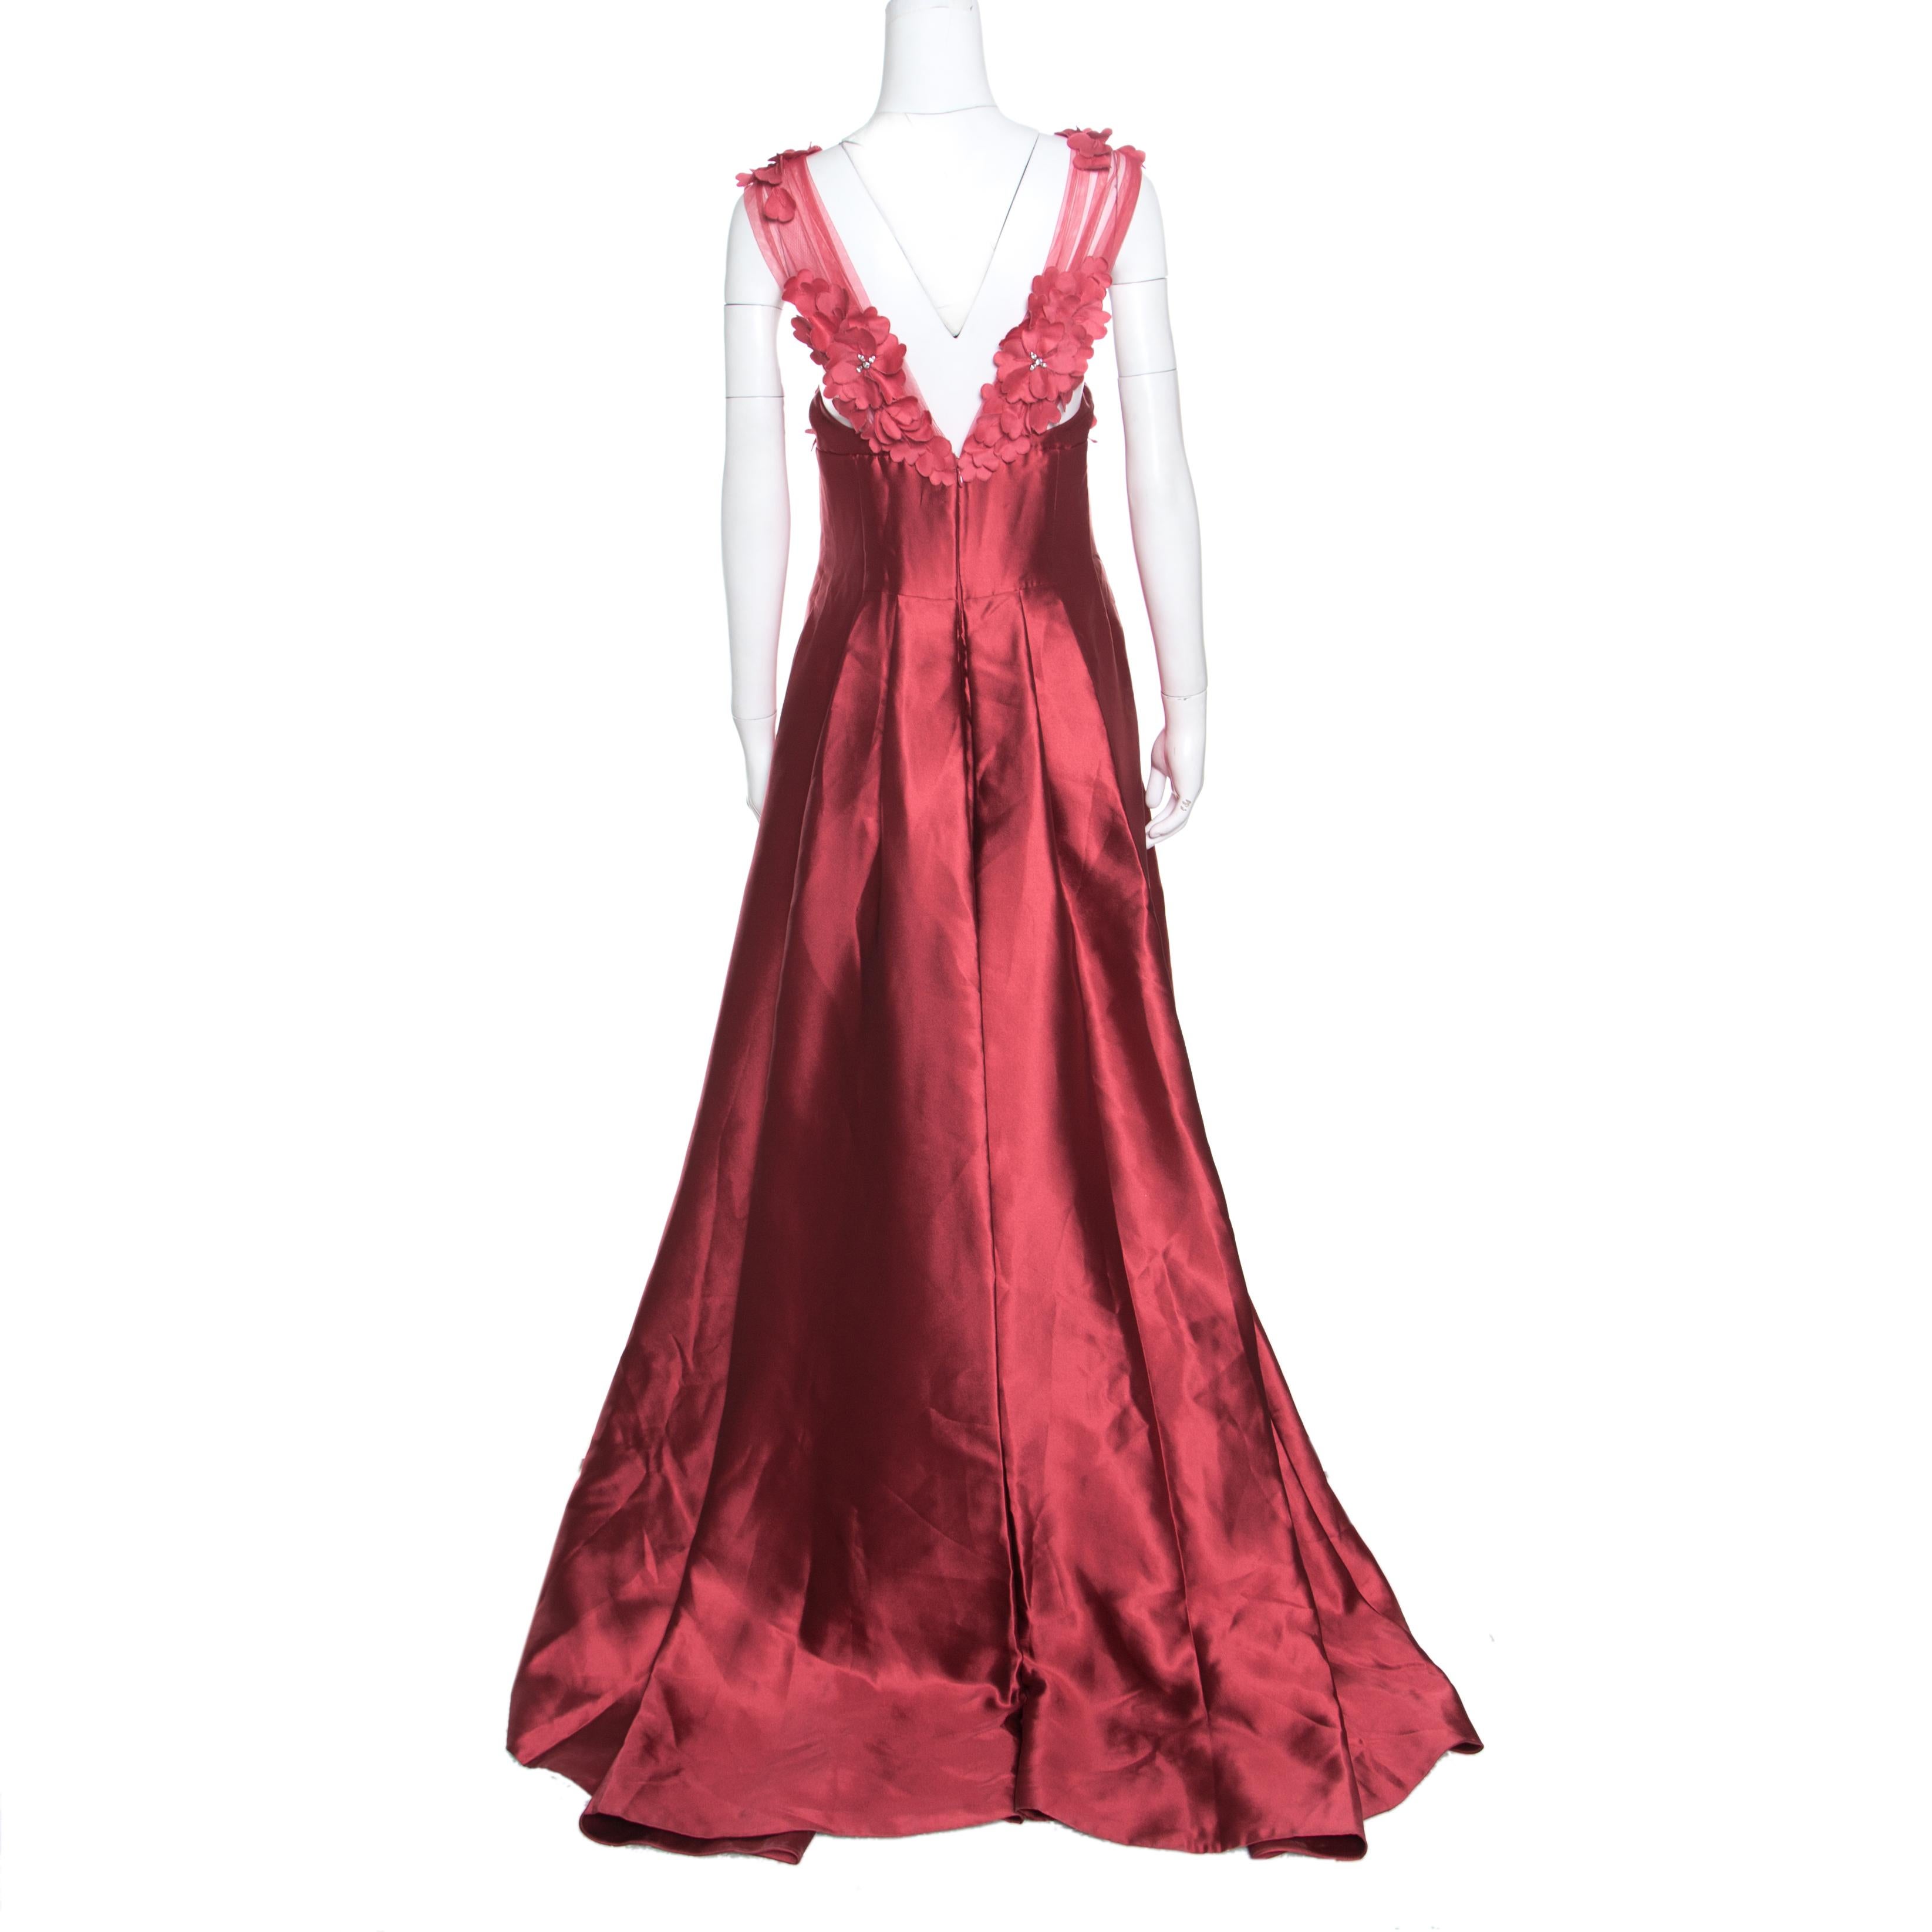 Express your love for modern-day styles and fashion by dressing in this extravagant gown from the house of Reem Acra. Ravishing in red, it is made of 100% silk and features a well-defined silhouette. It flaunts an artistic neckline with exquisite